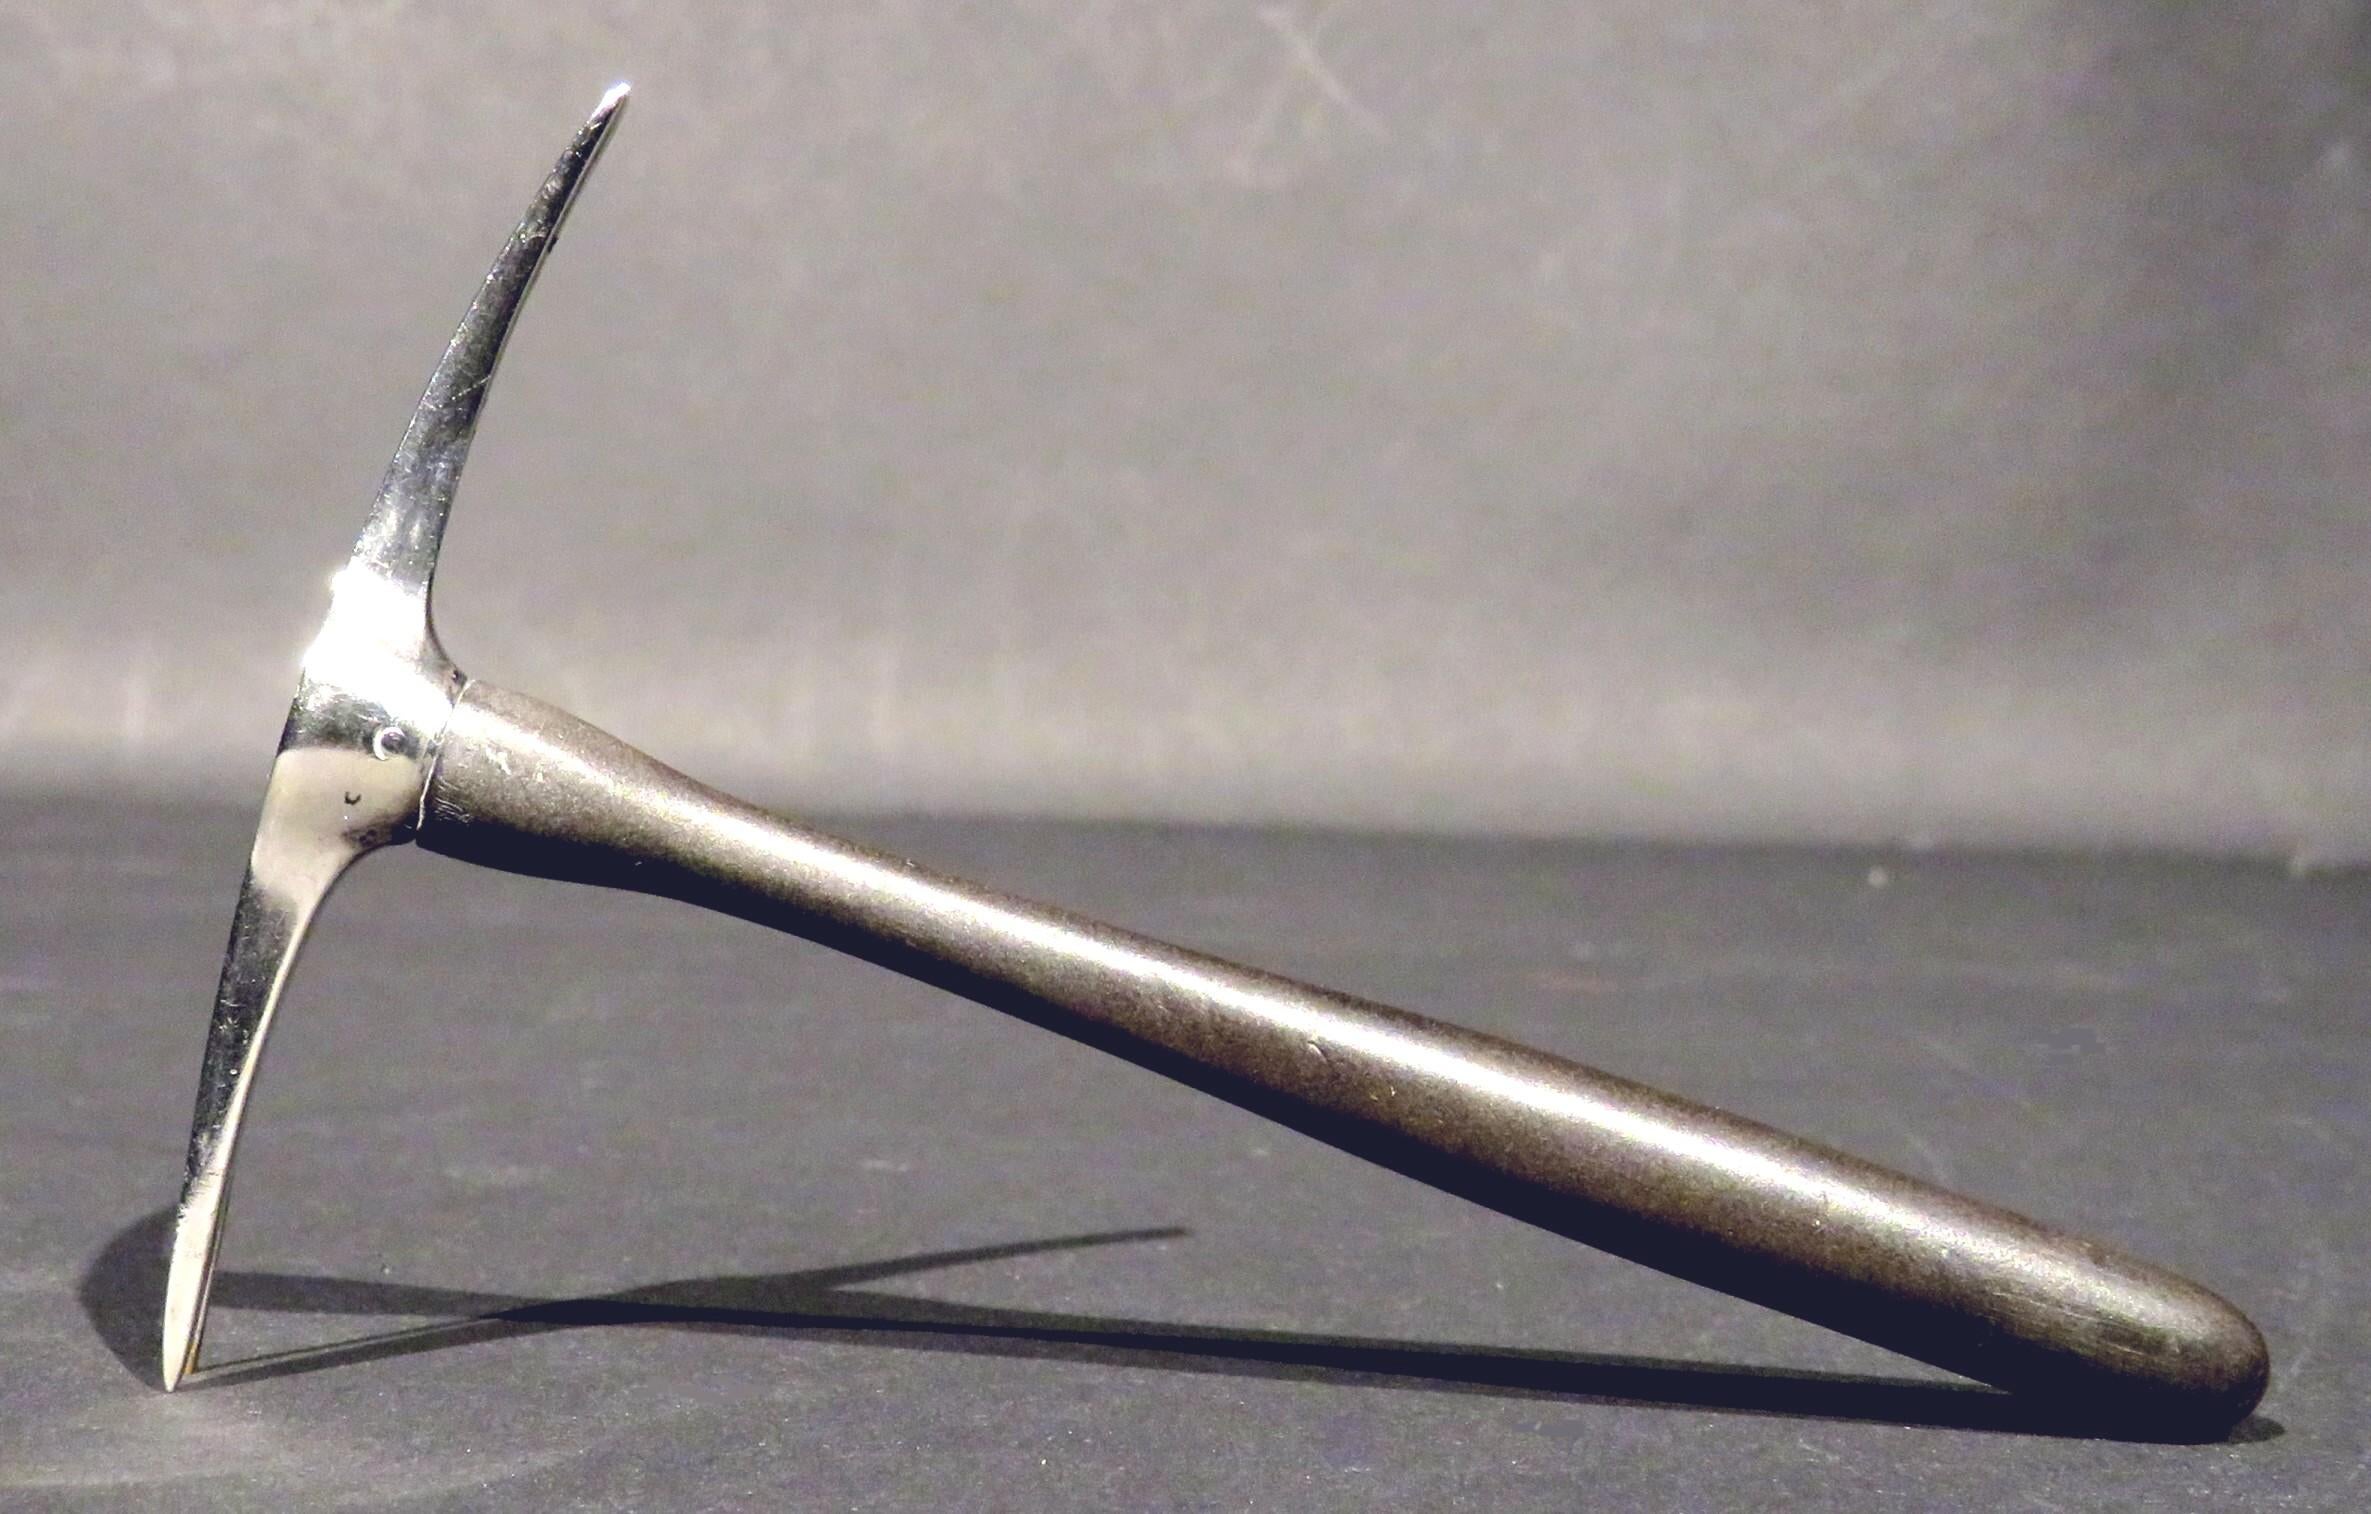 A most intriguing and relatively rare miniature model of a sterling silver pickaxe, showing a sterling silver axe-head affixed to a finely turned ebony handle. The sterling axe-head bearing impressed makers mark for Rogers, Lunt & Bowlen Co.,